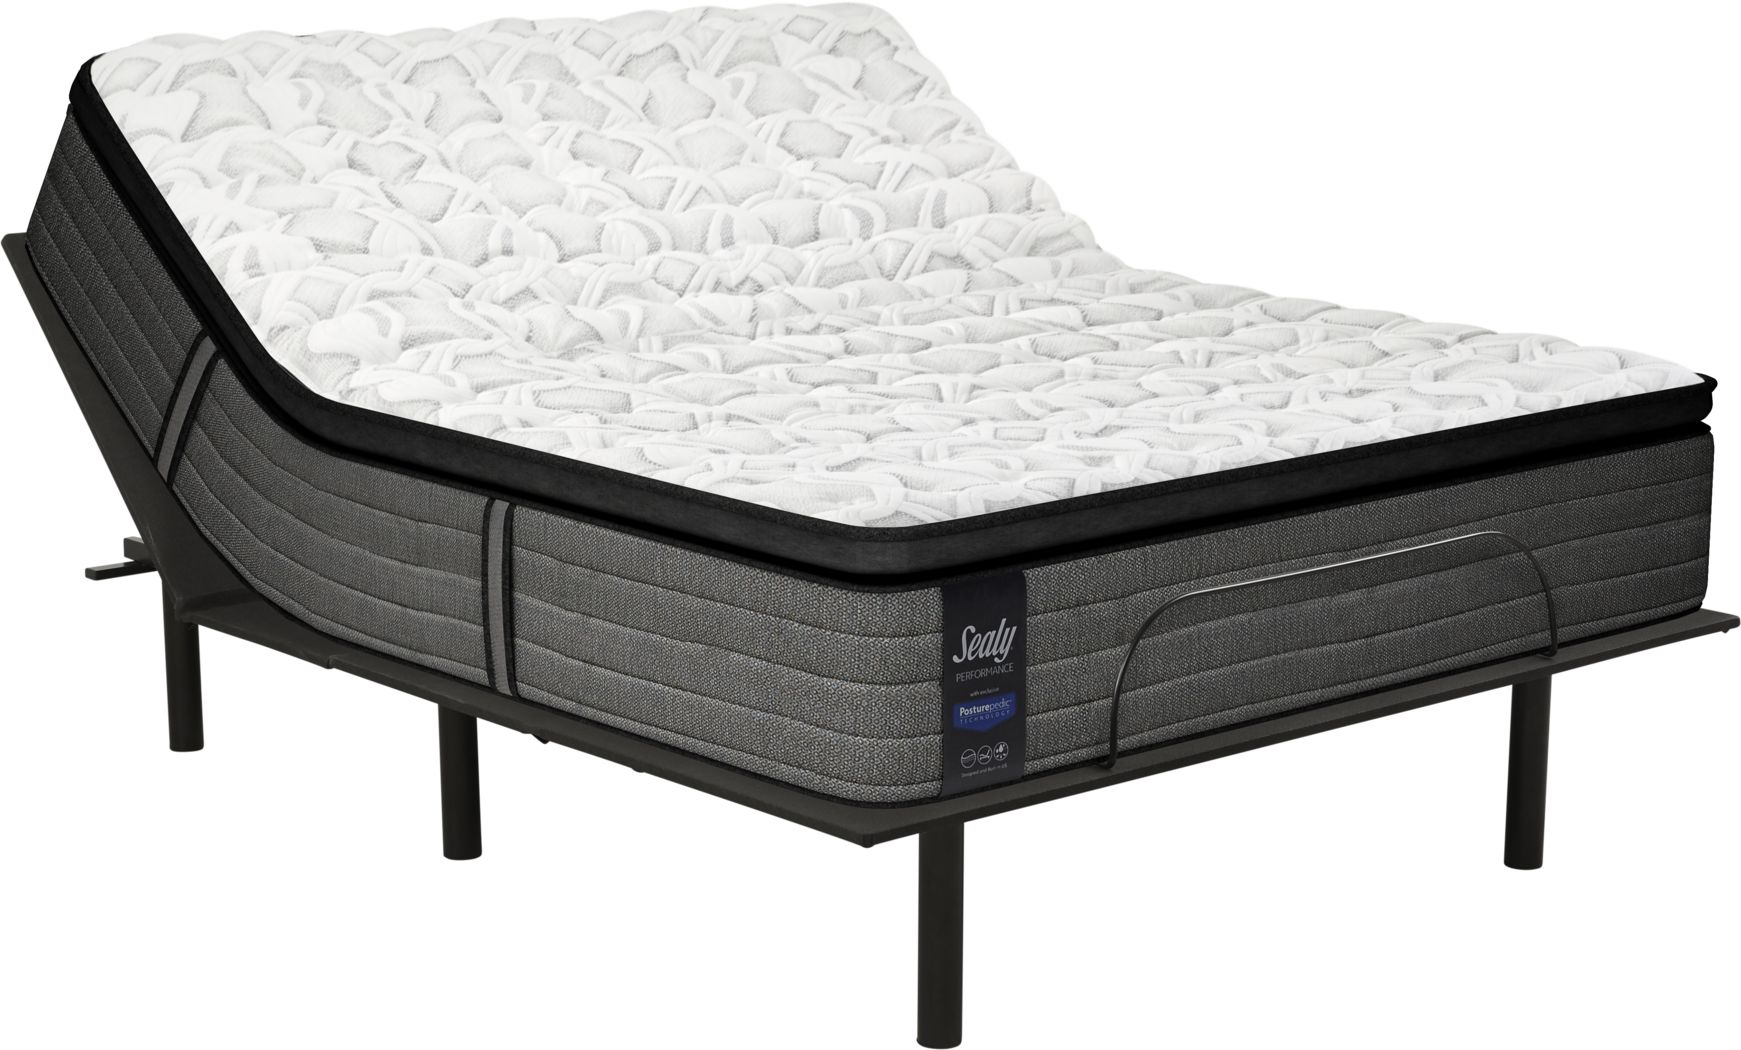 sealy performance paradise cove queen mattress reviews